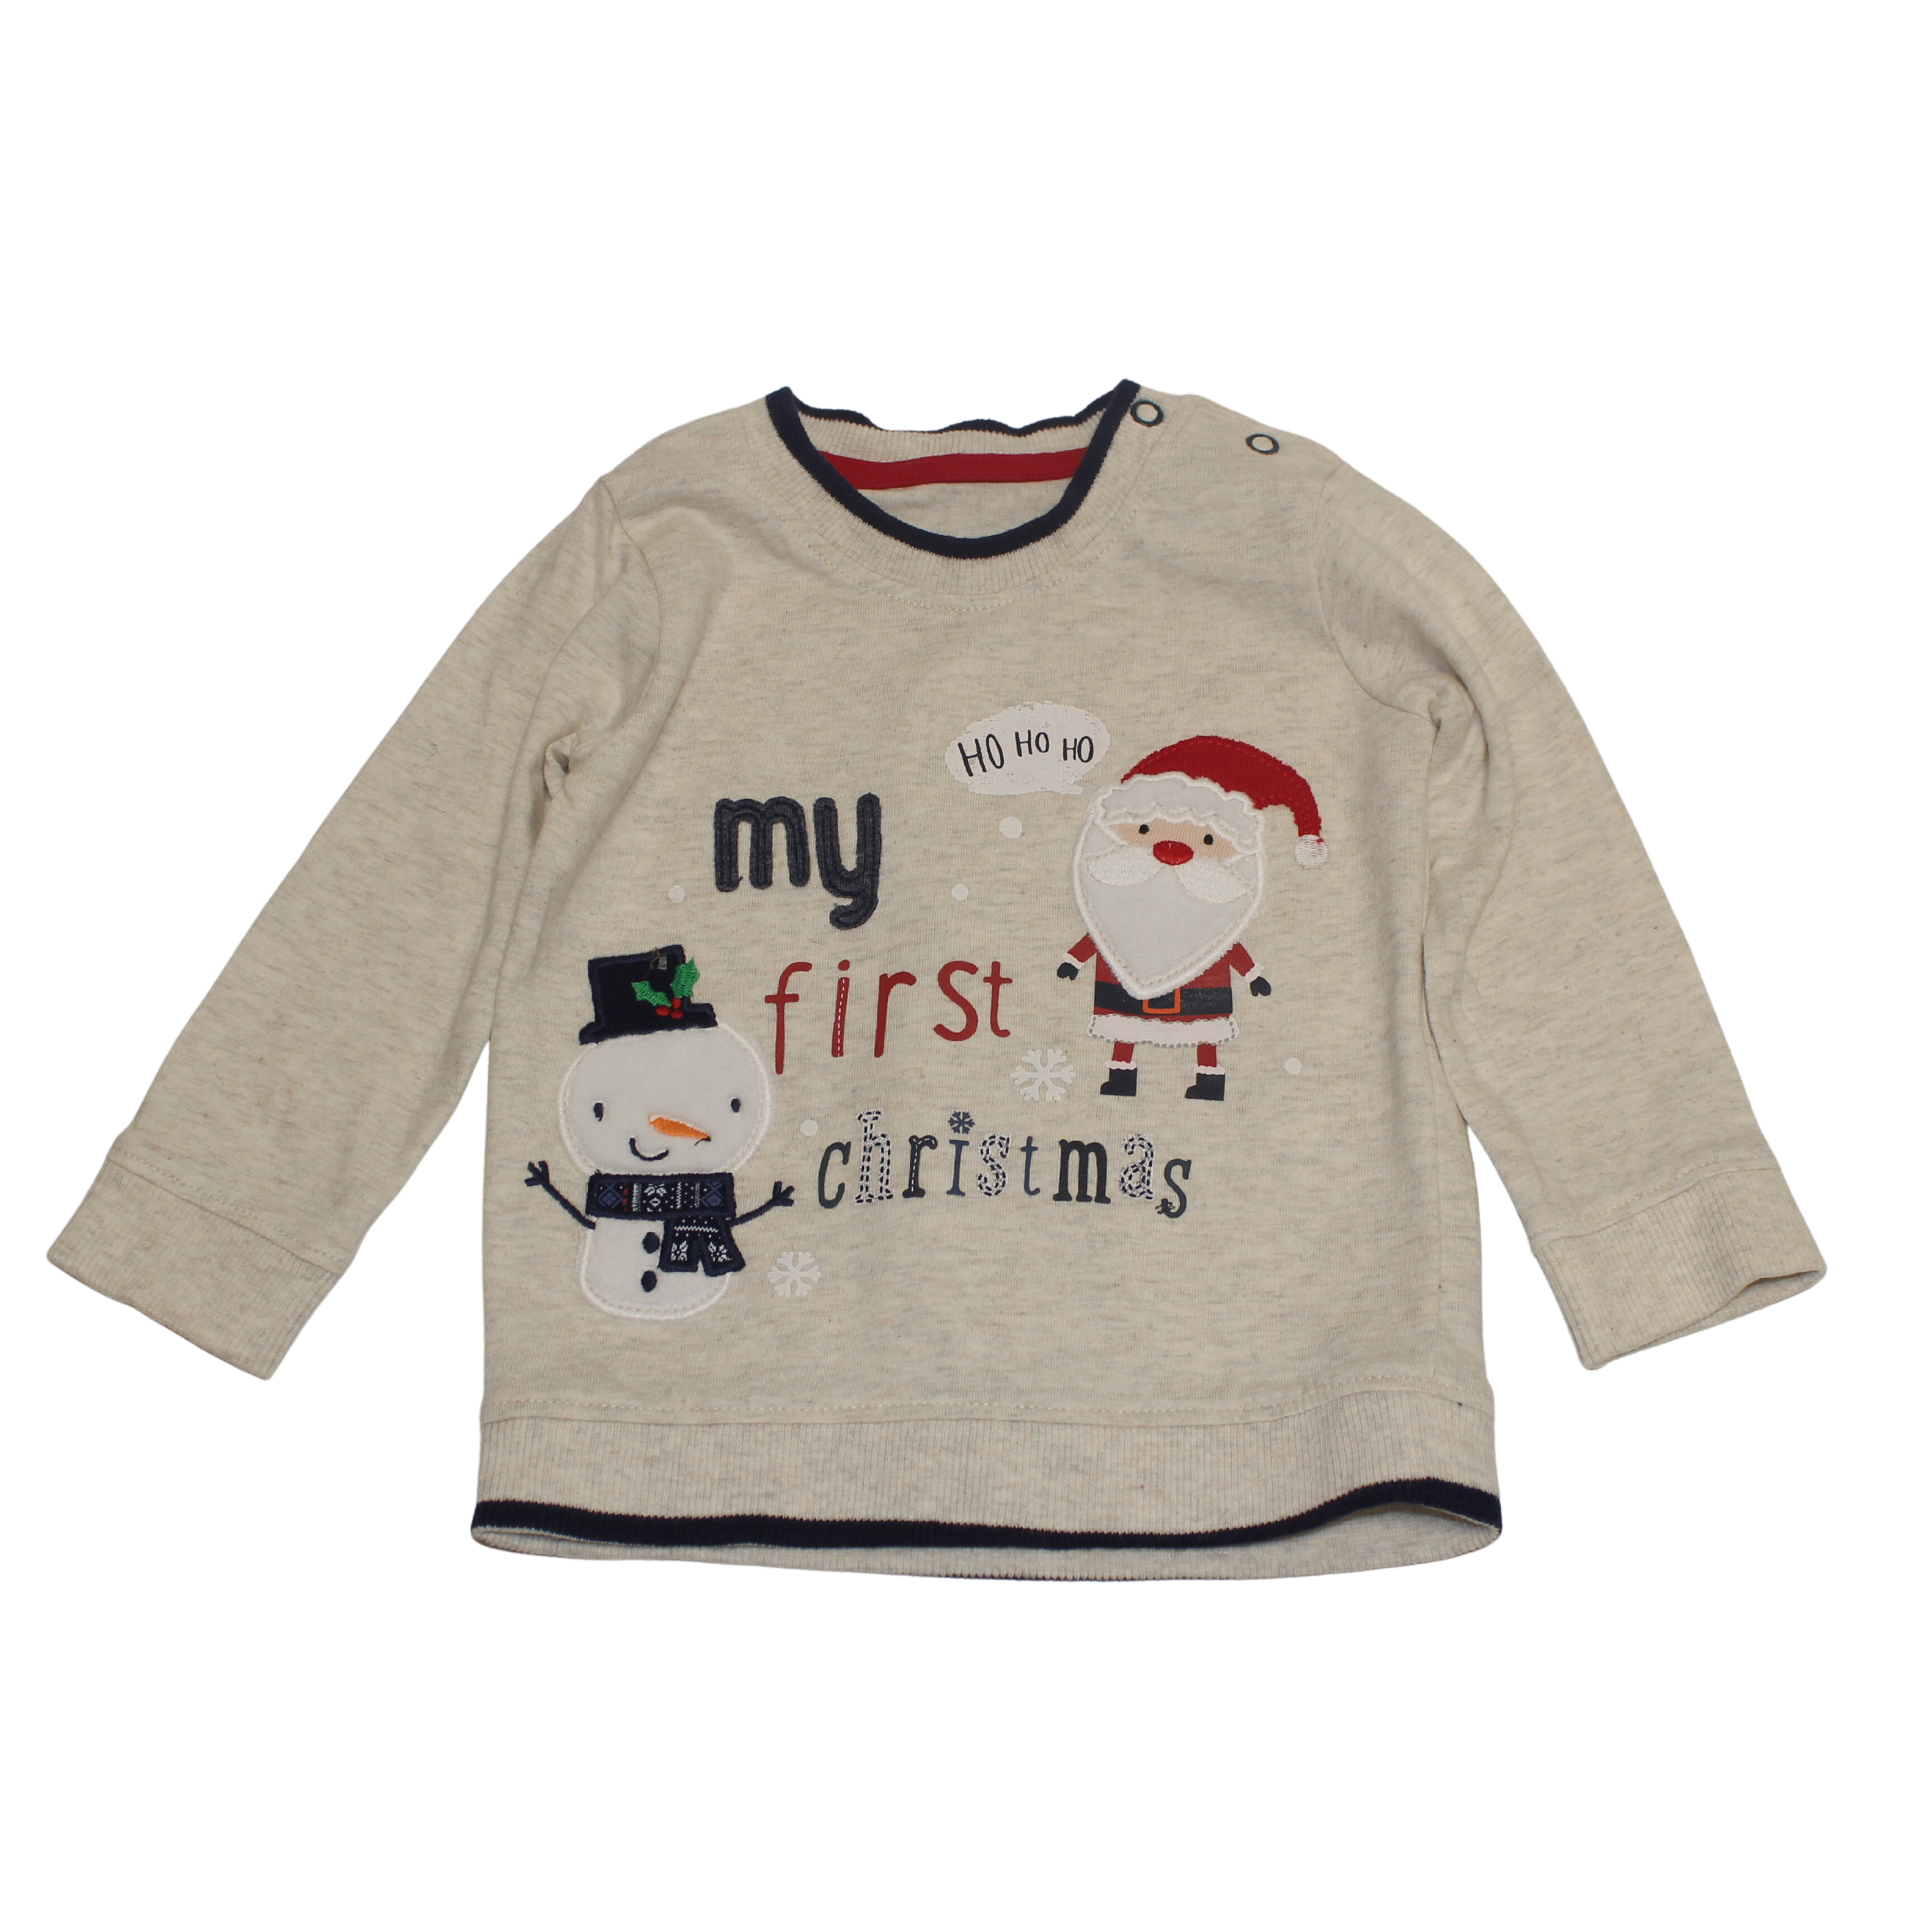 My First Christmas Top